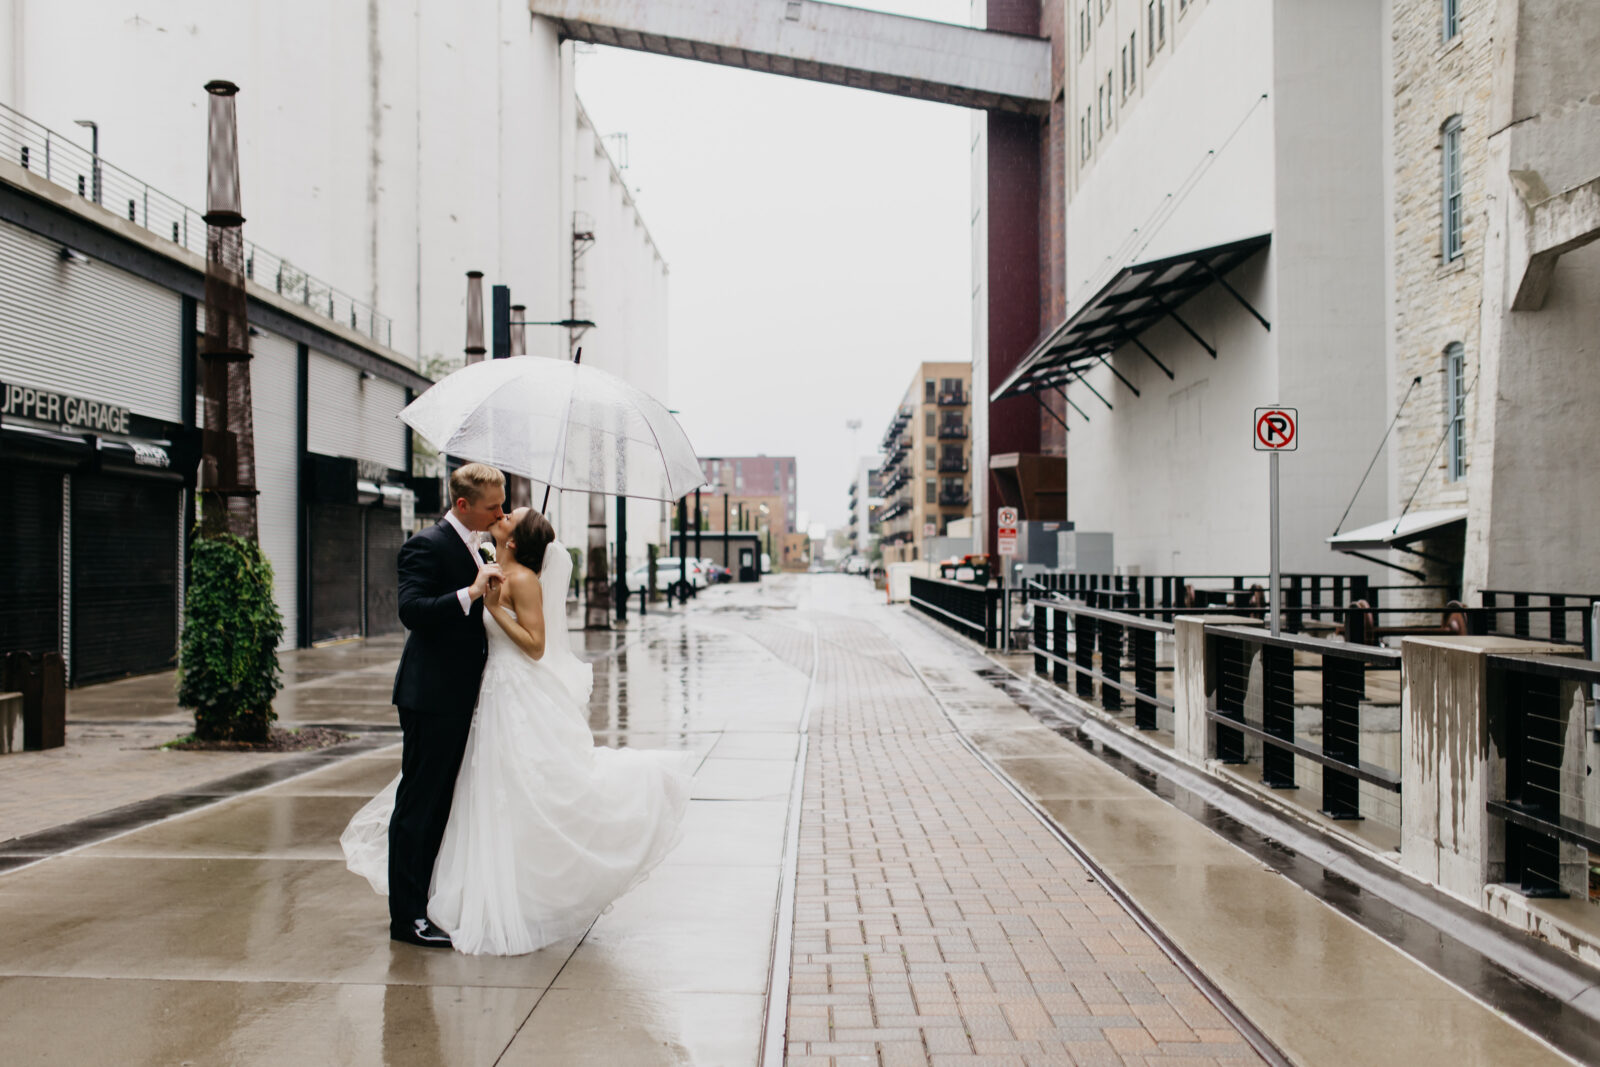 A photo of a newlywed couple kissing on the streets while carrying a clear dome umbrella